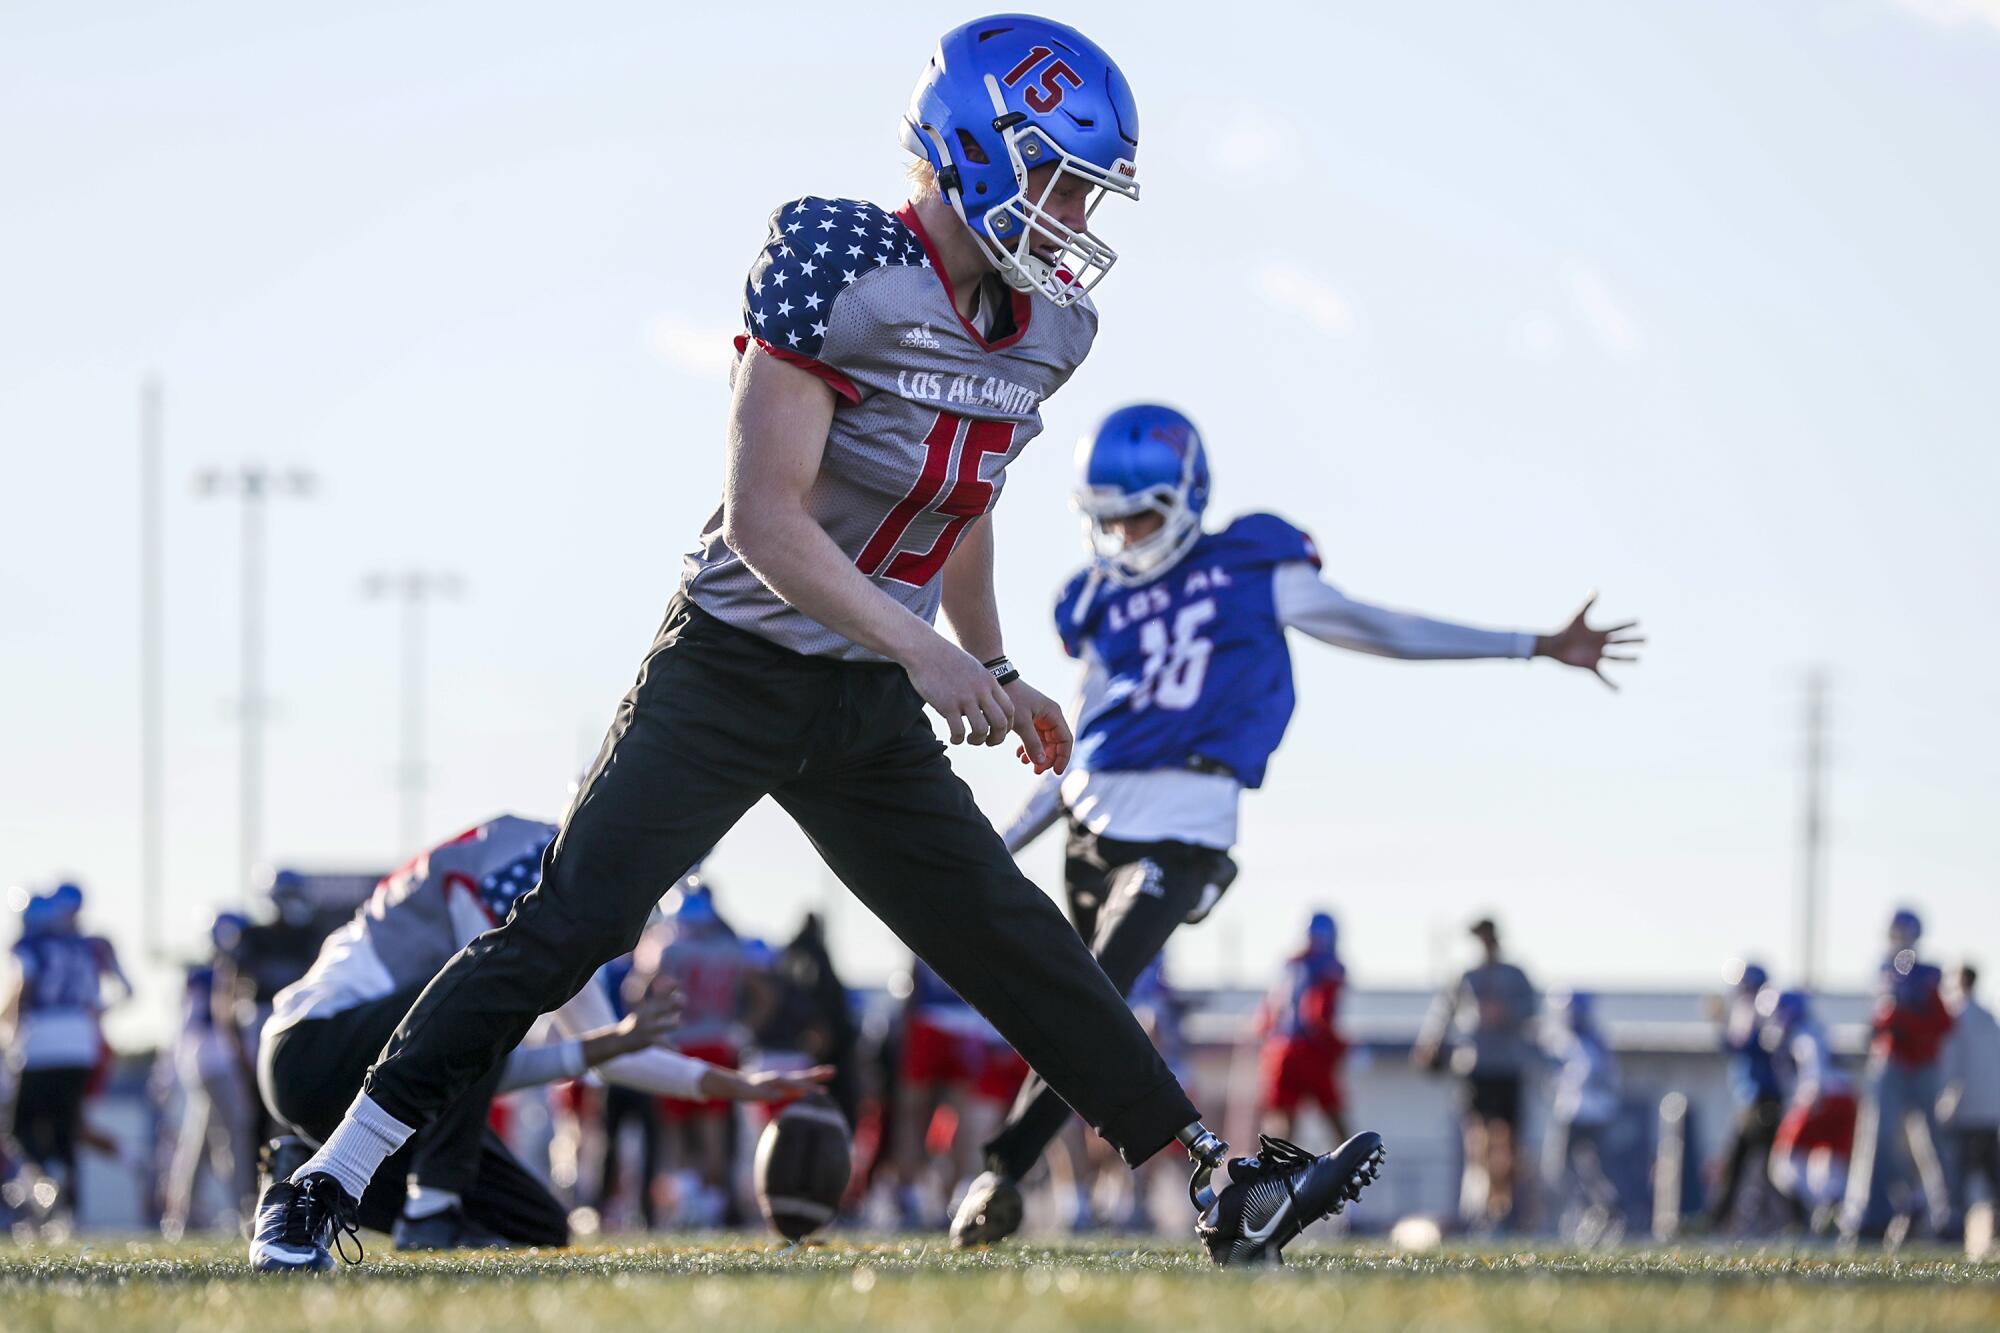 Los Alamitos long snapper Carson Fox walks on a football field with a prosthetic leg.